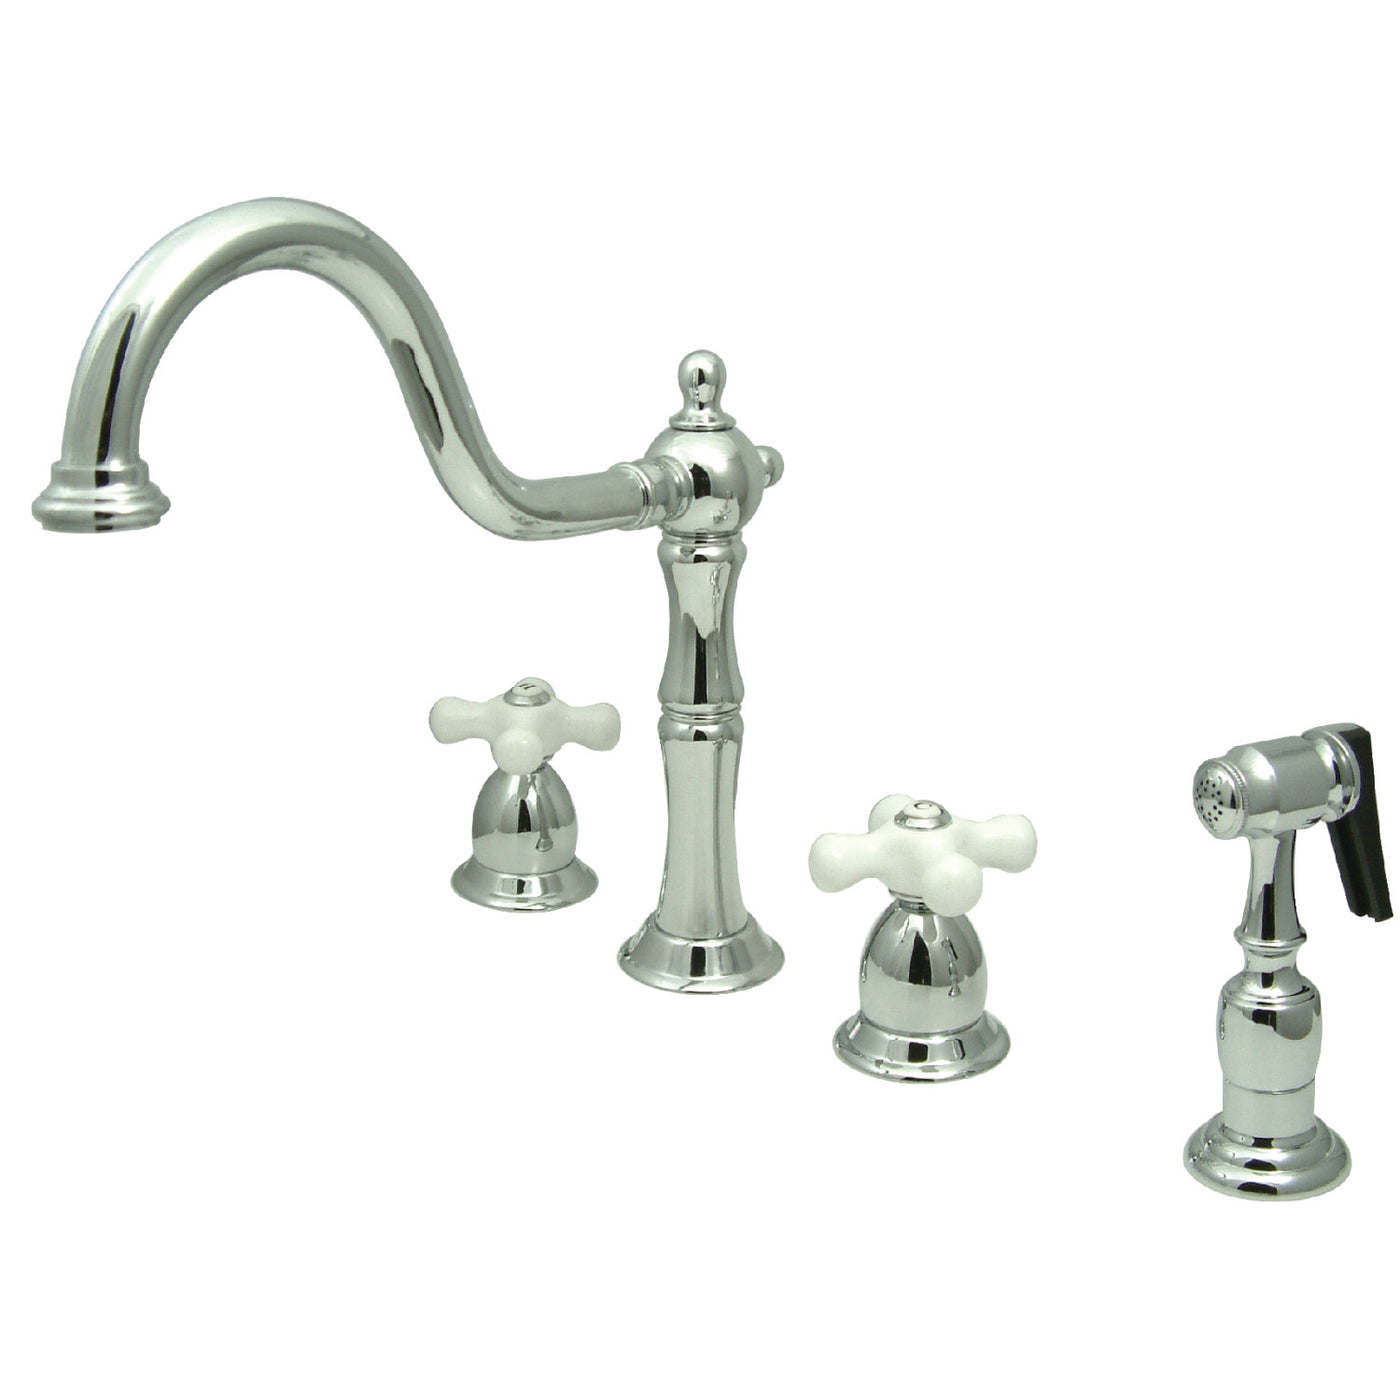 Elements of Design EB1791PXBS Widespread Kitchen Faucet with Brass Sprayer, Polished Chrome